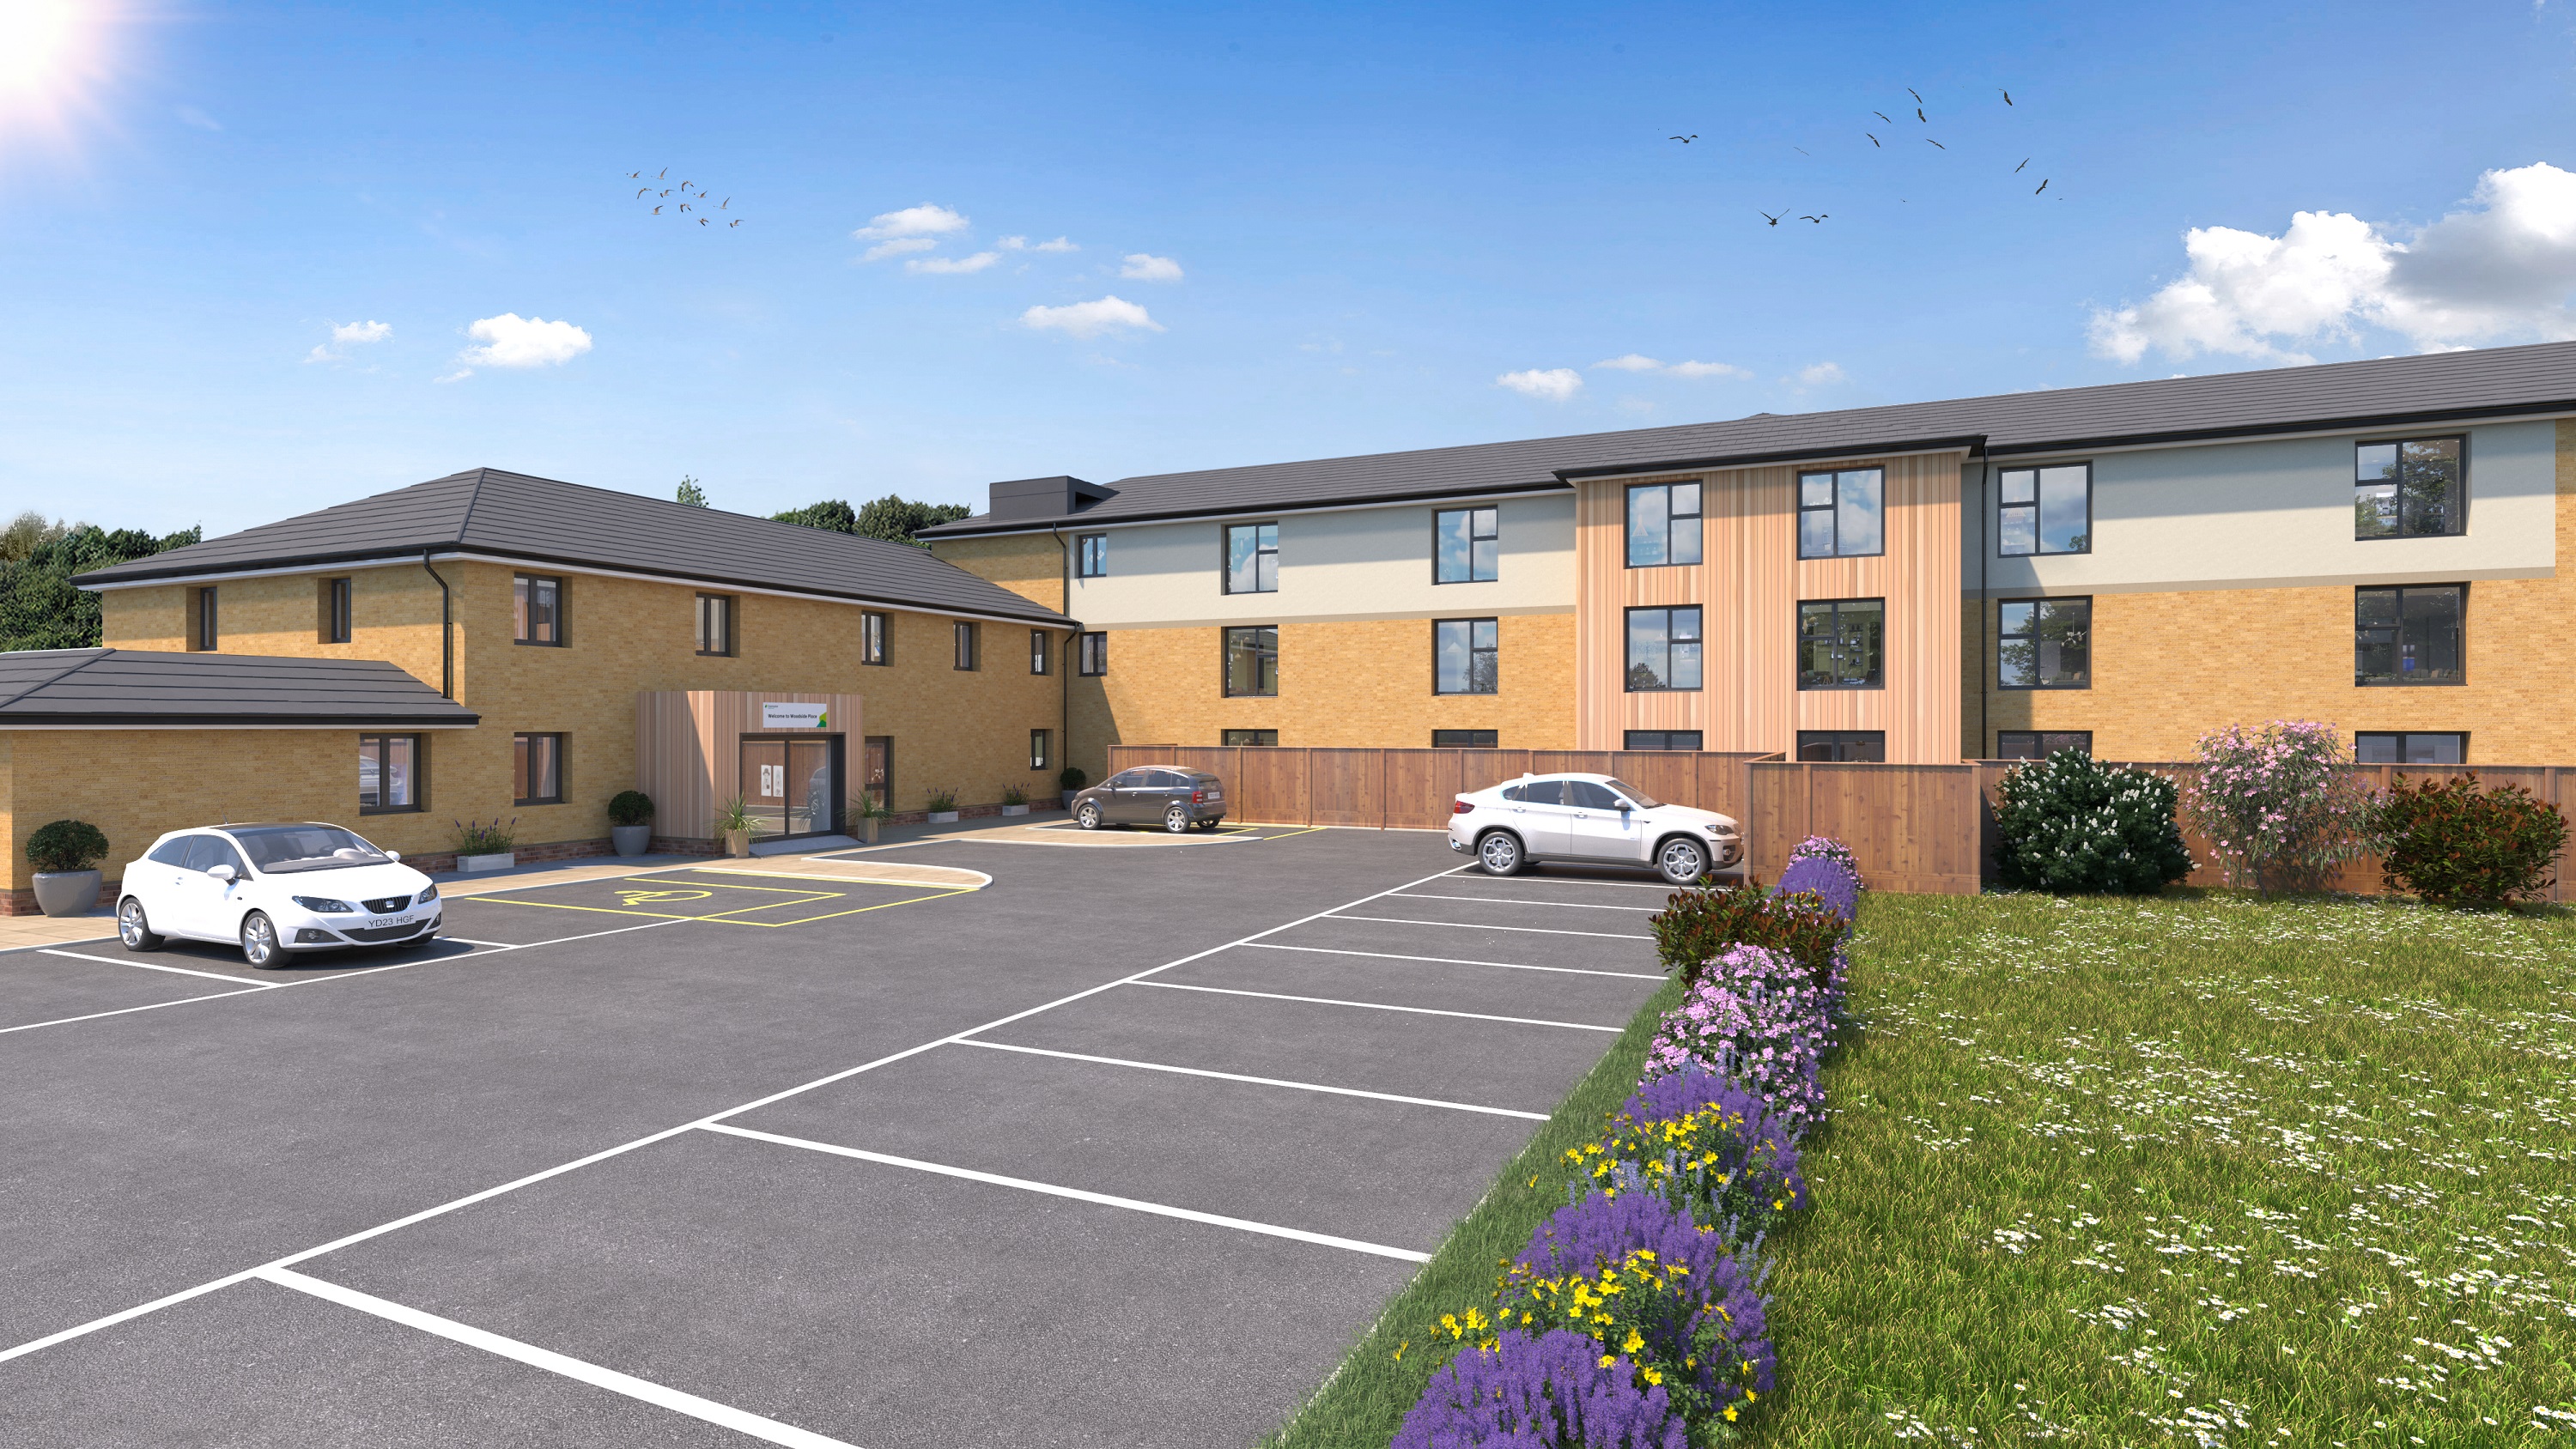 Work starts on specialist £5.2m care home which will create 100 jobs in Telford